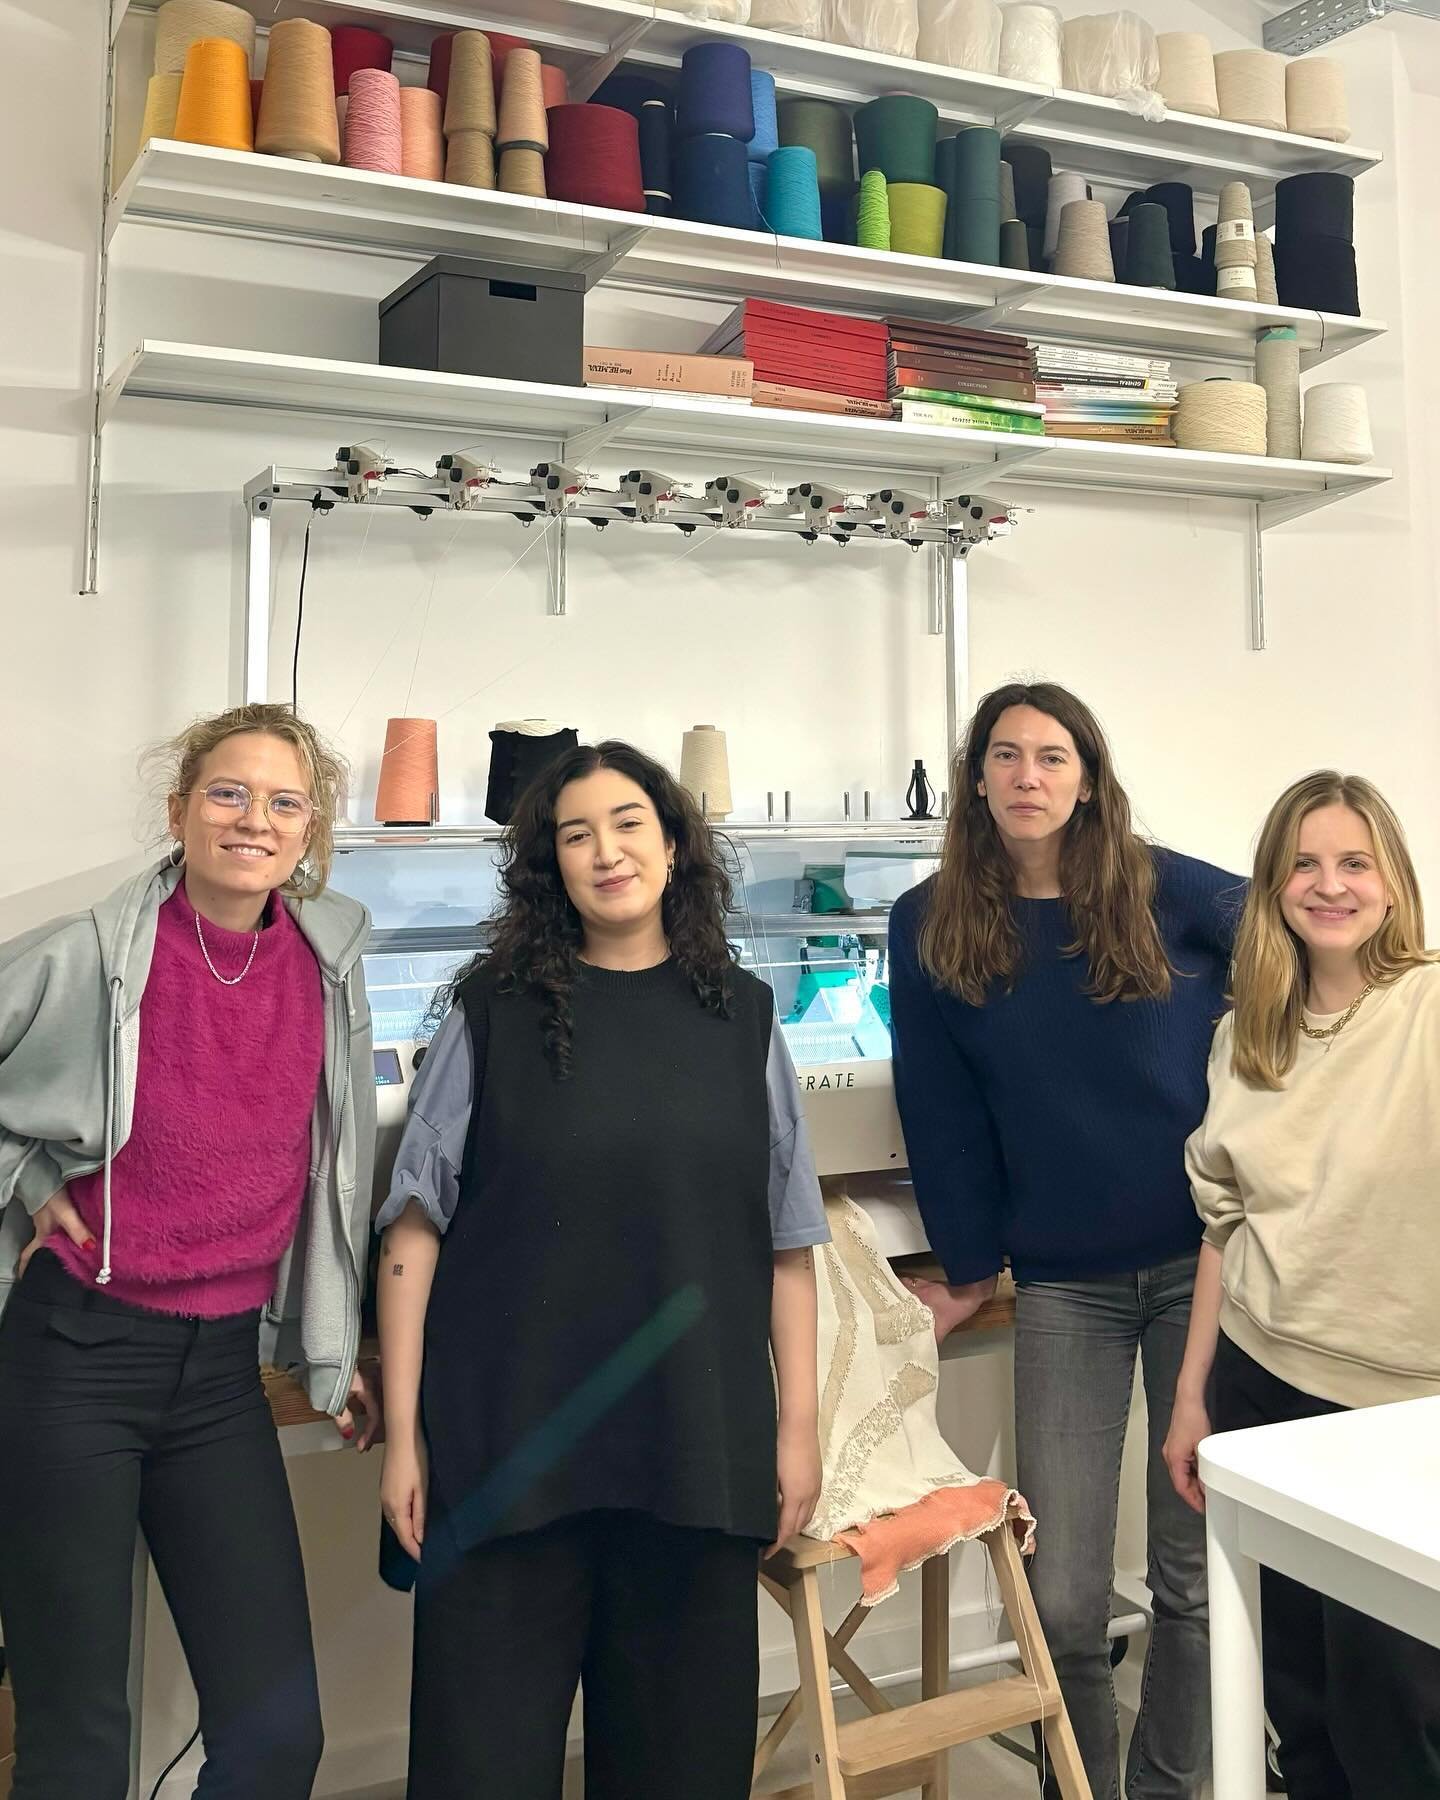 In preparation for the @worth_project exhibition in the @isola.design quarter during @milan_design_week, @amalia.martinez.aznar visited us in Berlin. As part of a workshop and prototyping session, we did some sampling as well as the production of the